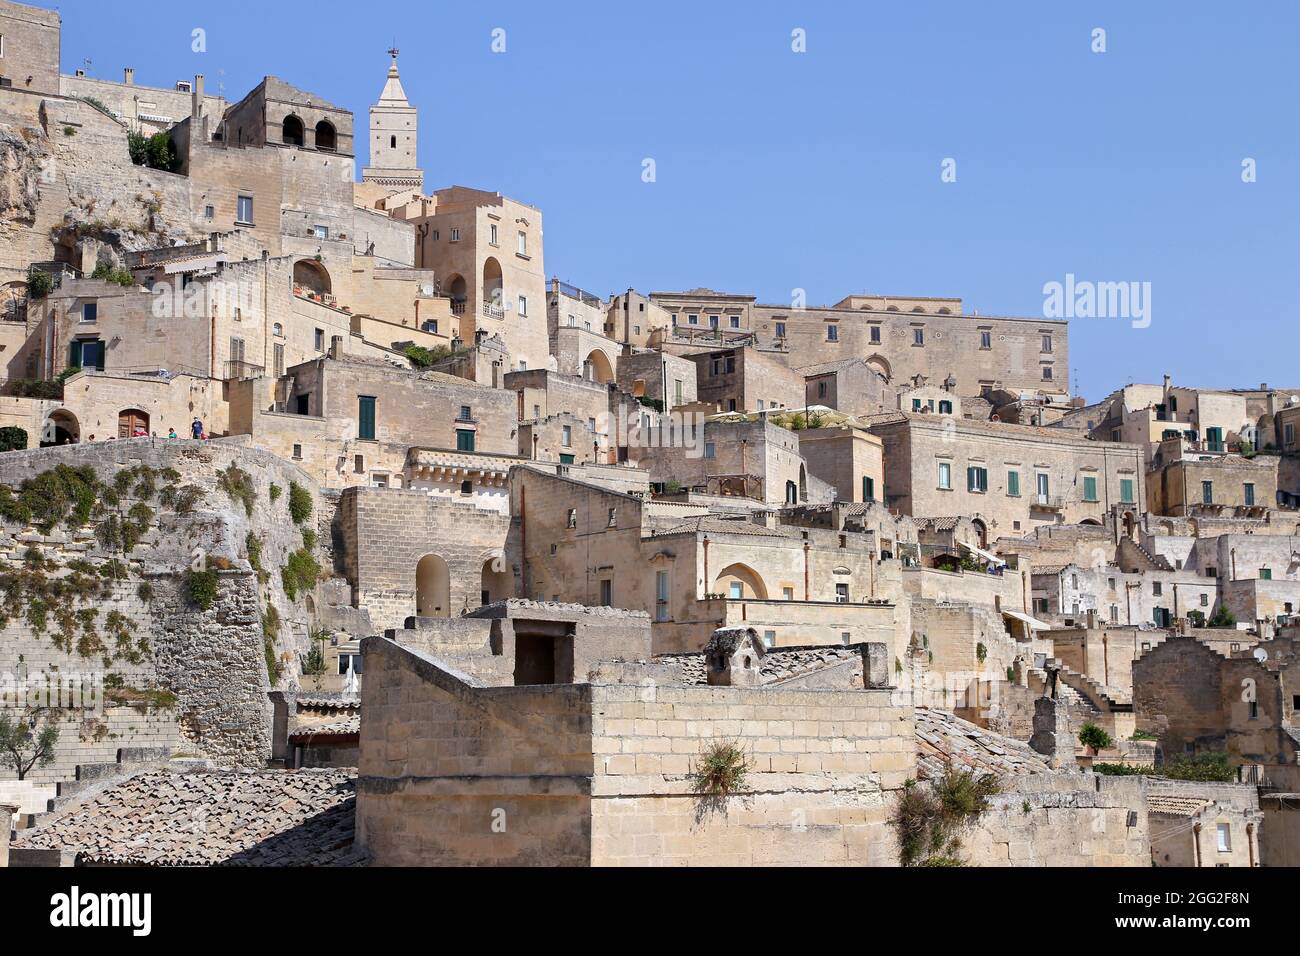 Matera, Italy - August 17, 2020: View of the Sassi di Matera a historic district in the city of Matera, well-known for their ancient cave dwellings. B Stock Photo